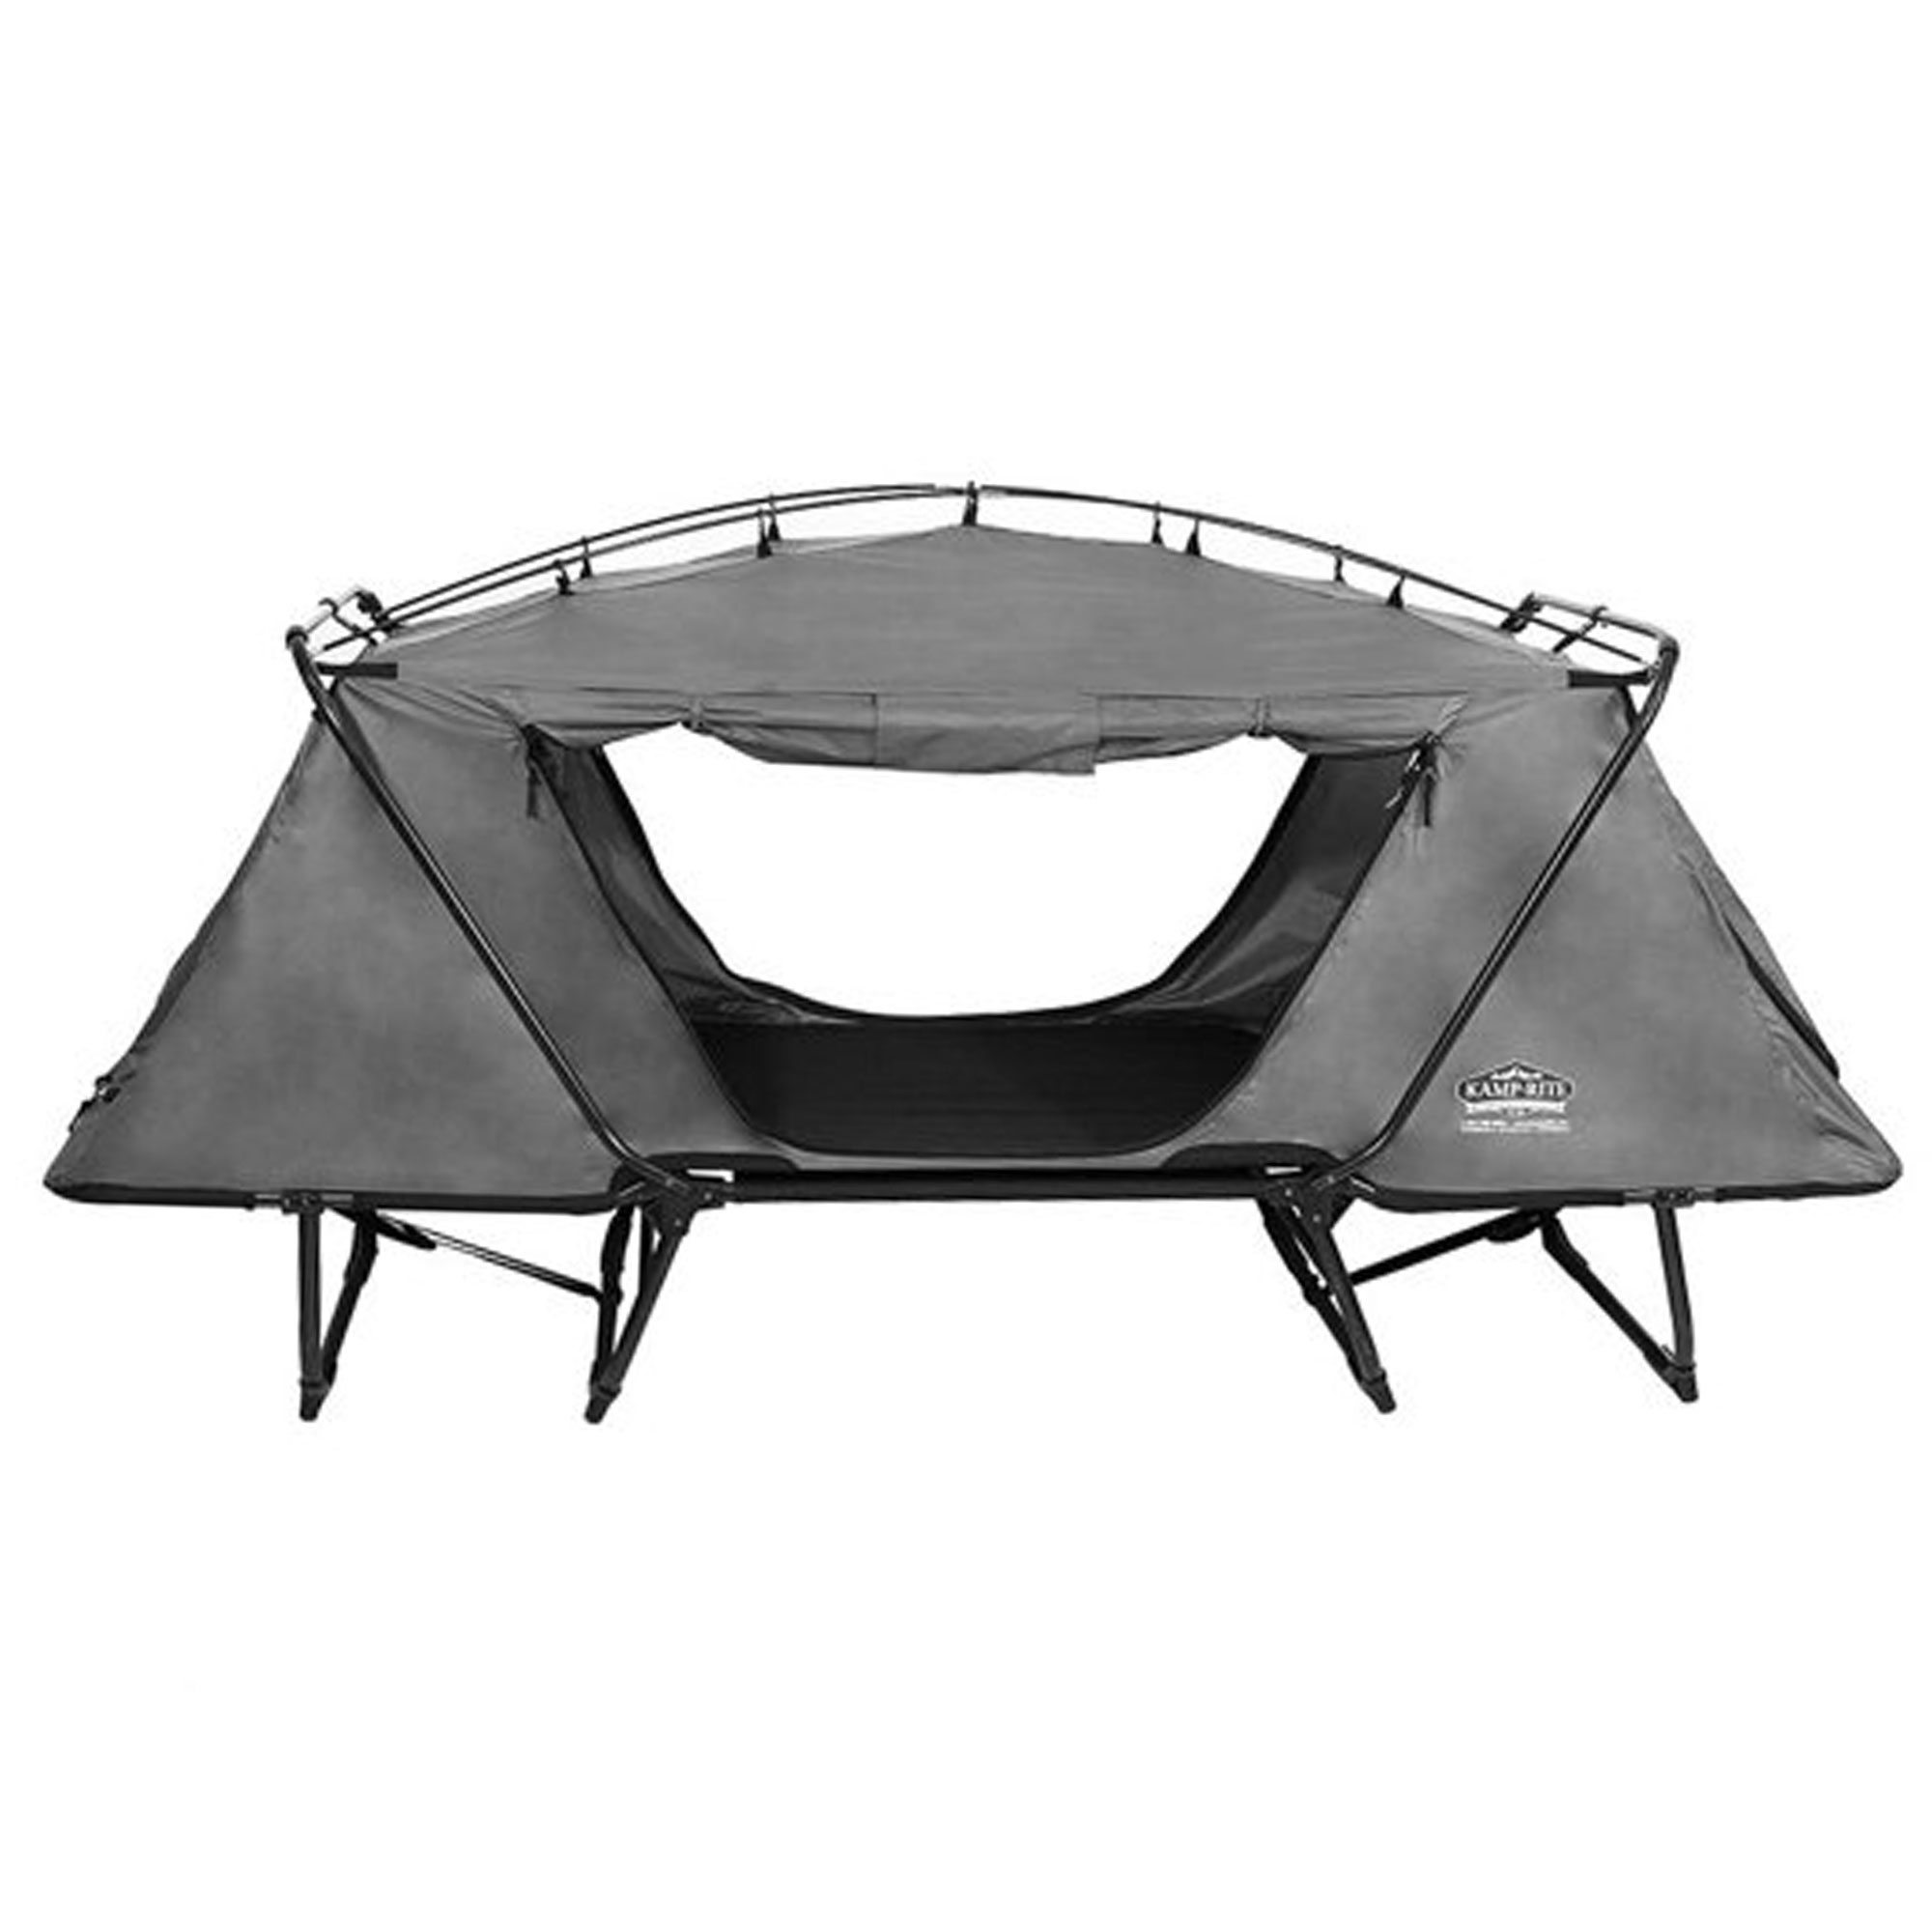 Kamp-Rite Oversized Quick Setup 1 Person Cot, Chair, & Tent w/Domed Top - image 1 of 8